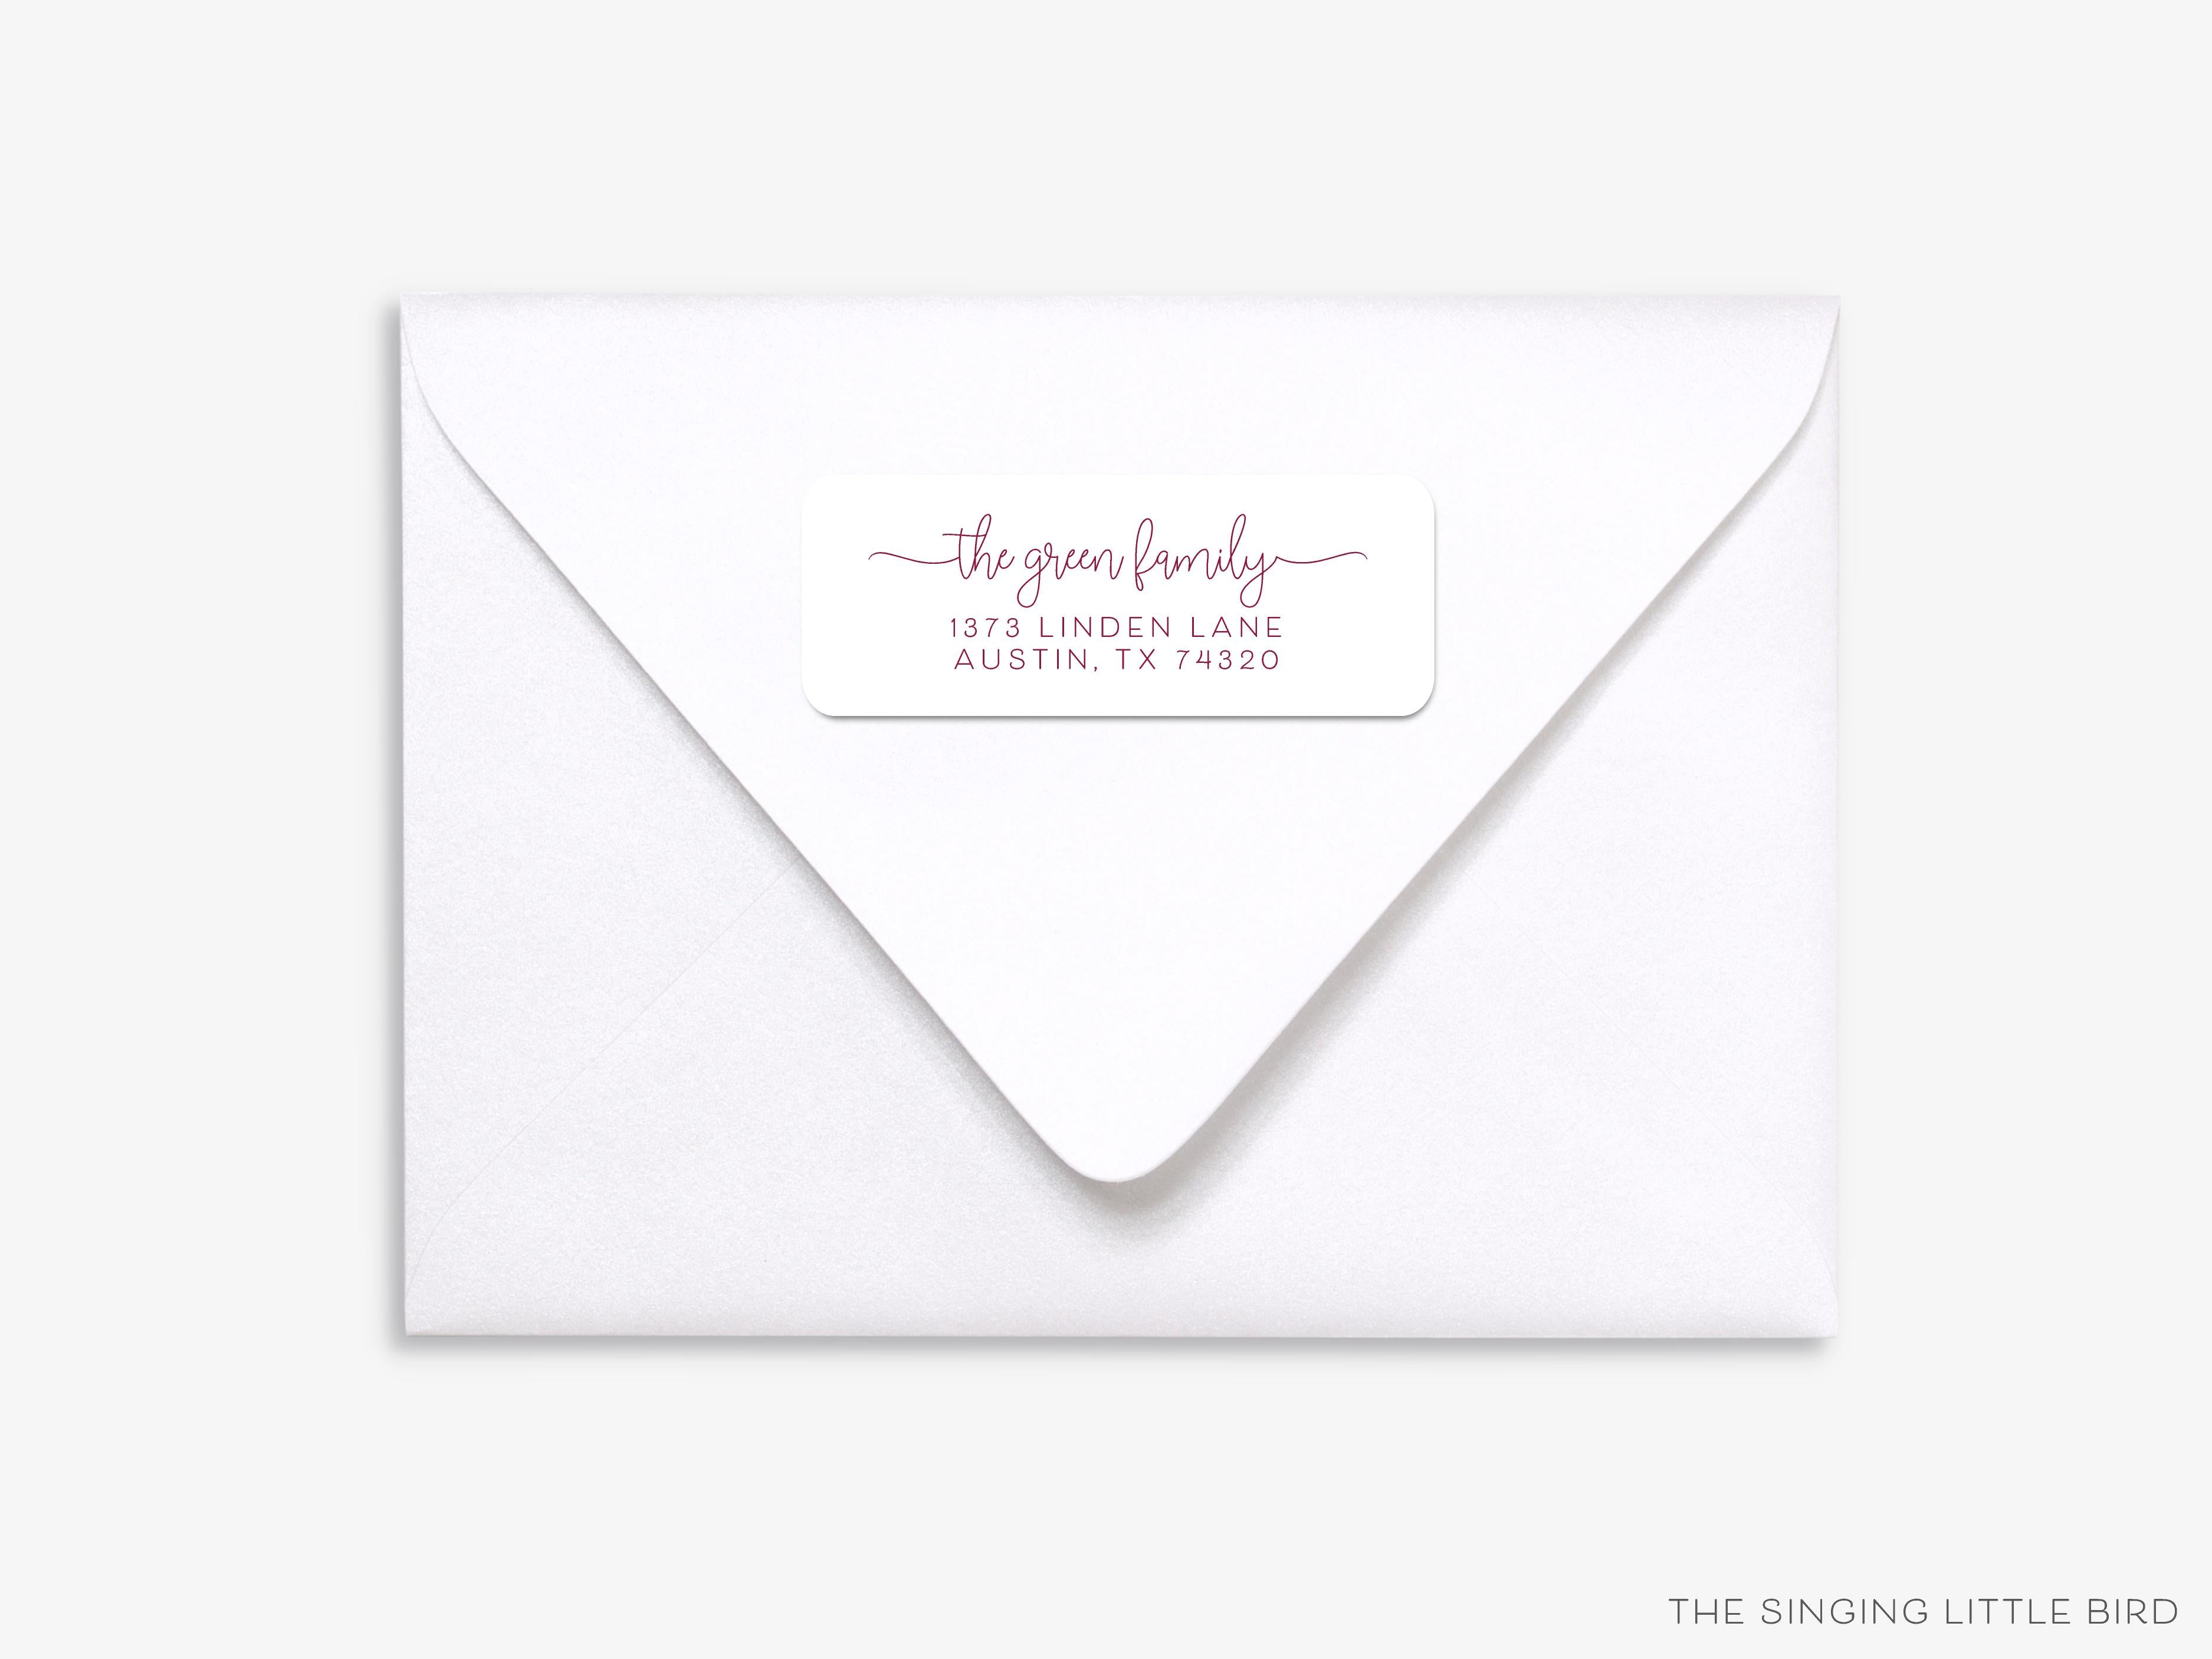 Modern Script Return Address Labels-These personalized return address labels are 2.625" x 1" and feature our hand-painted watercolor modern script, printed in the USA on beautiful matte finish labels. These make great gifts for yourself or the modern lover.-The Singing Little Bird